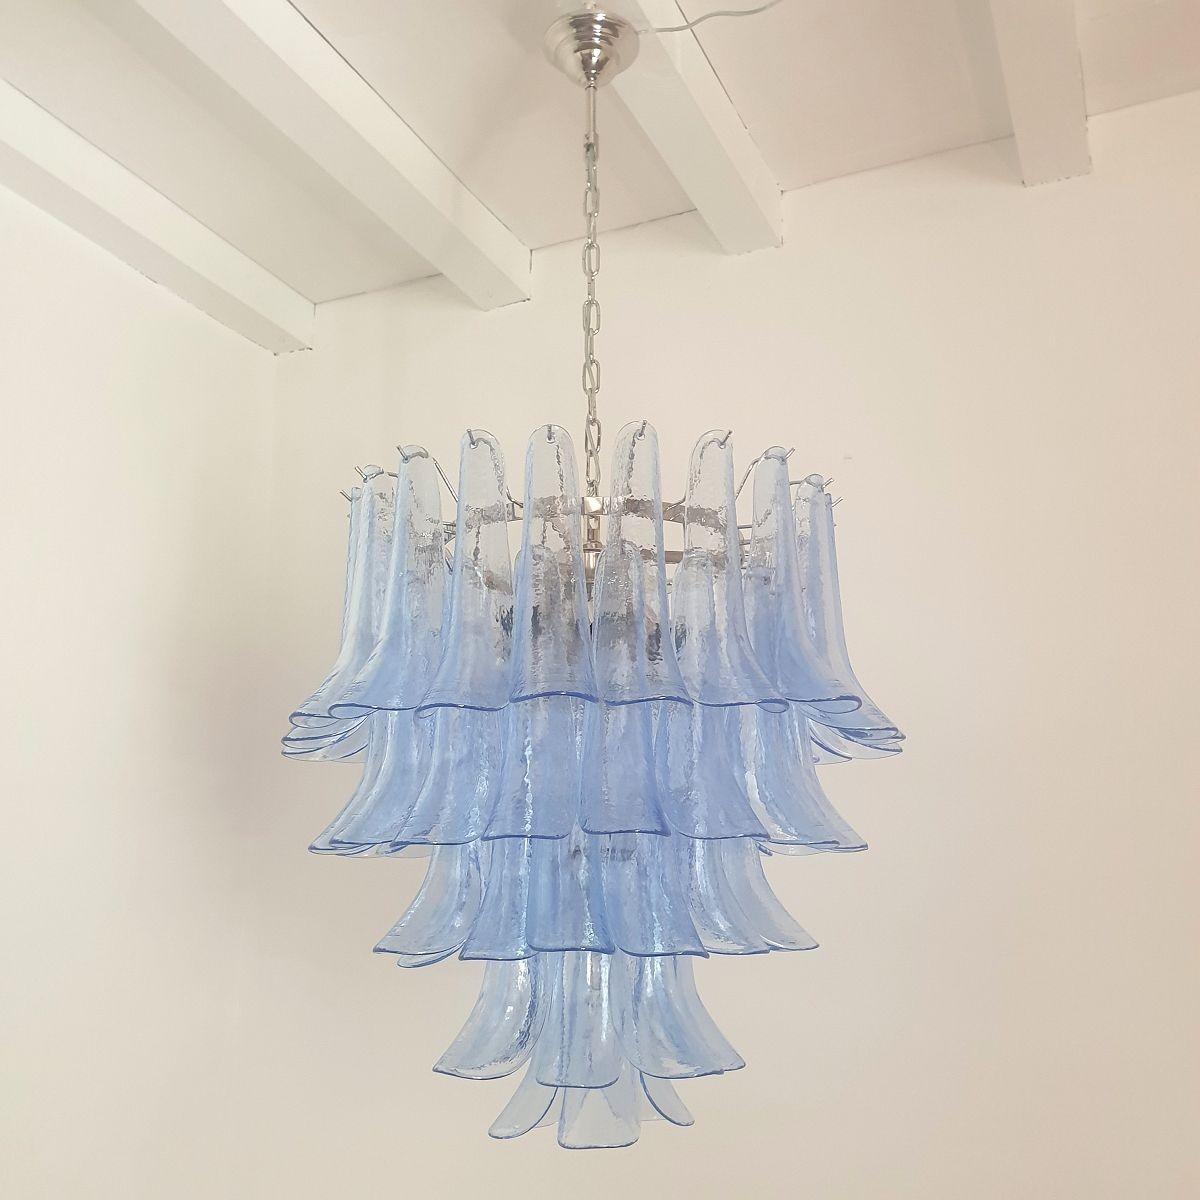 Mid century modern five-tier transparent blue Murano glass chandelier, by Mazzega, Italy, 1980s.
A pair available - Set of two chandeliers. Sold and priced individually.
To inquire about the pair, select 2 items.
The light blue Murano glass